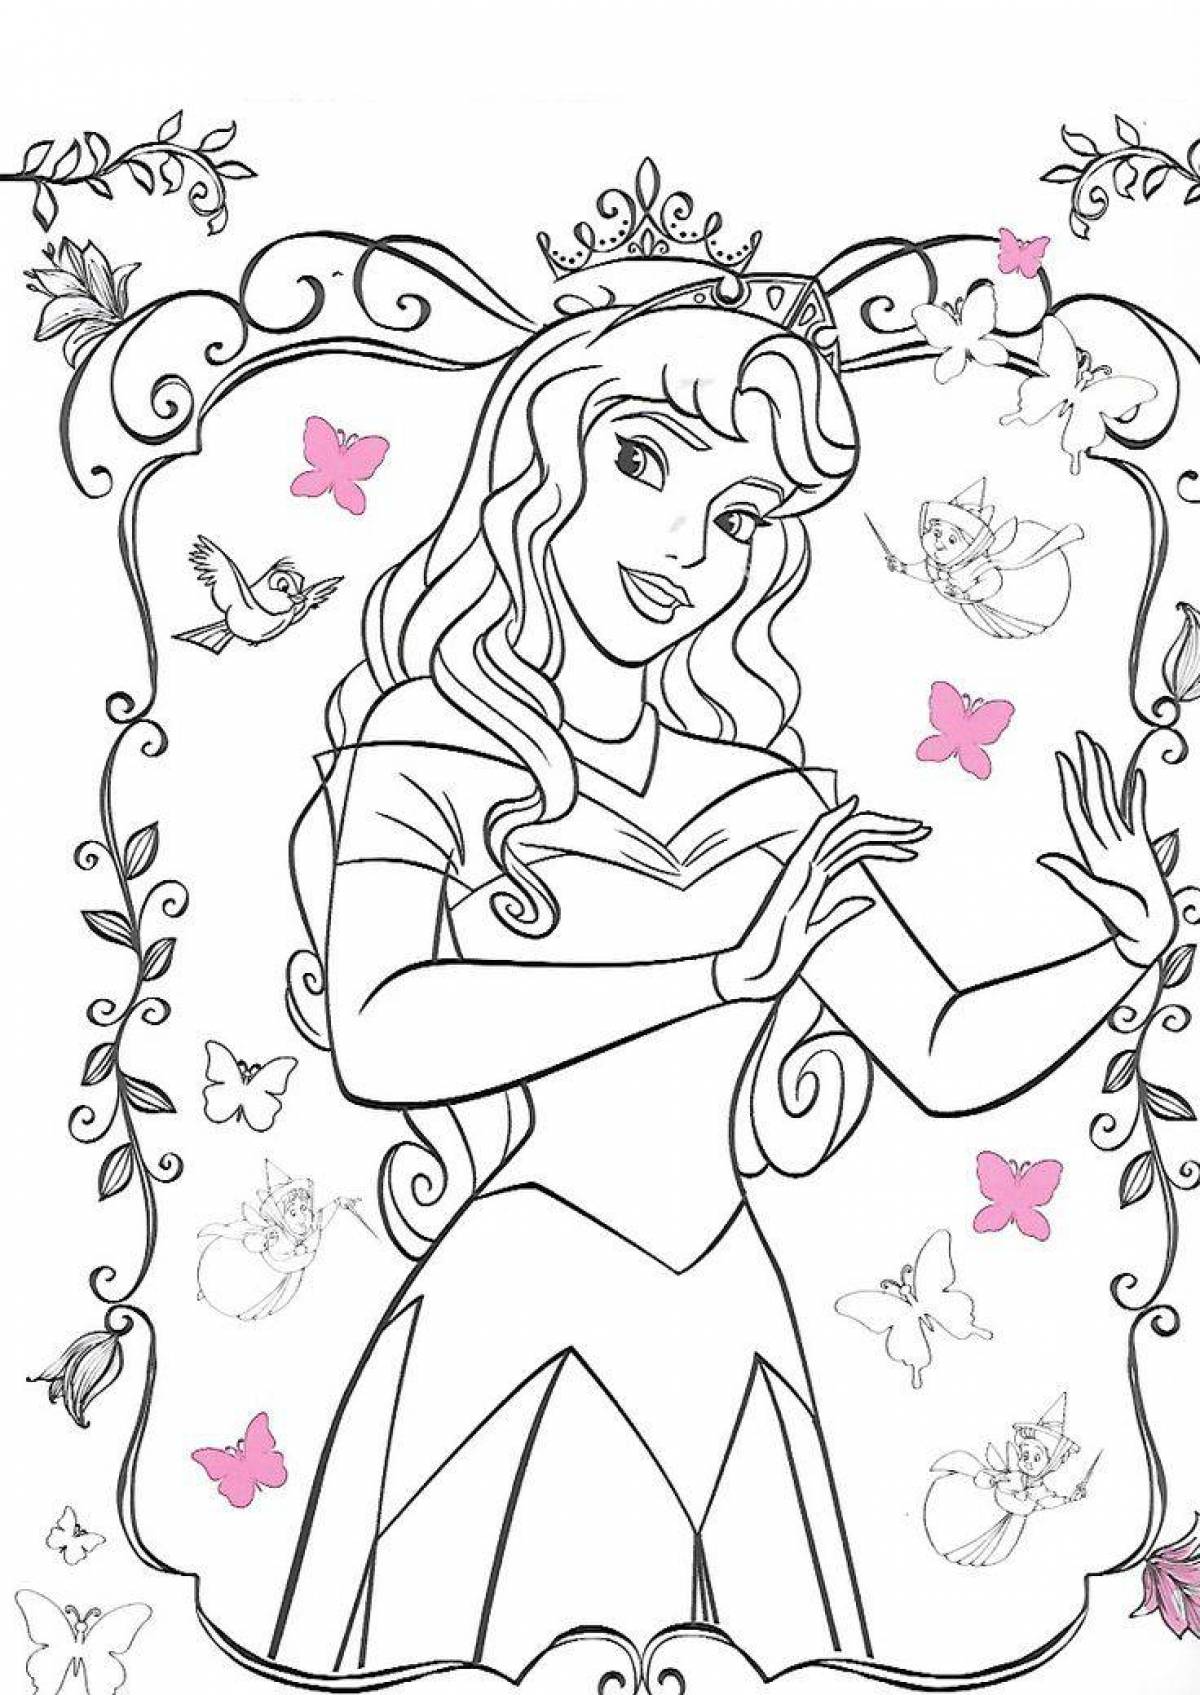 Playful aurora coloring page